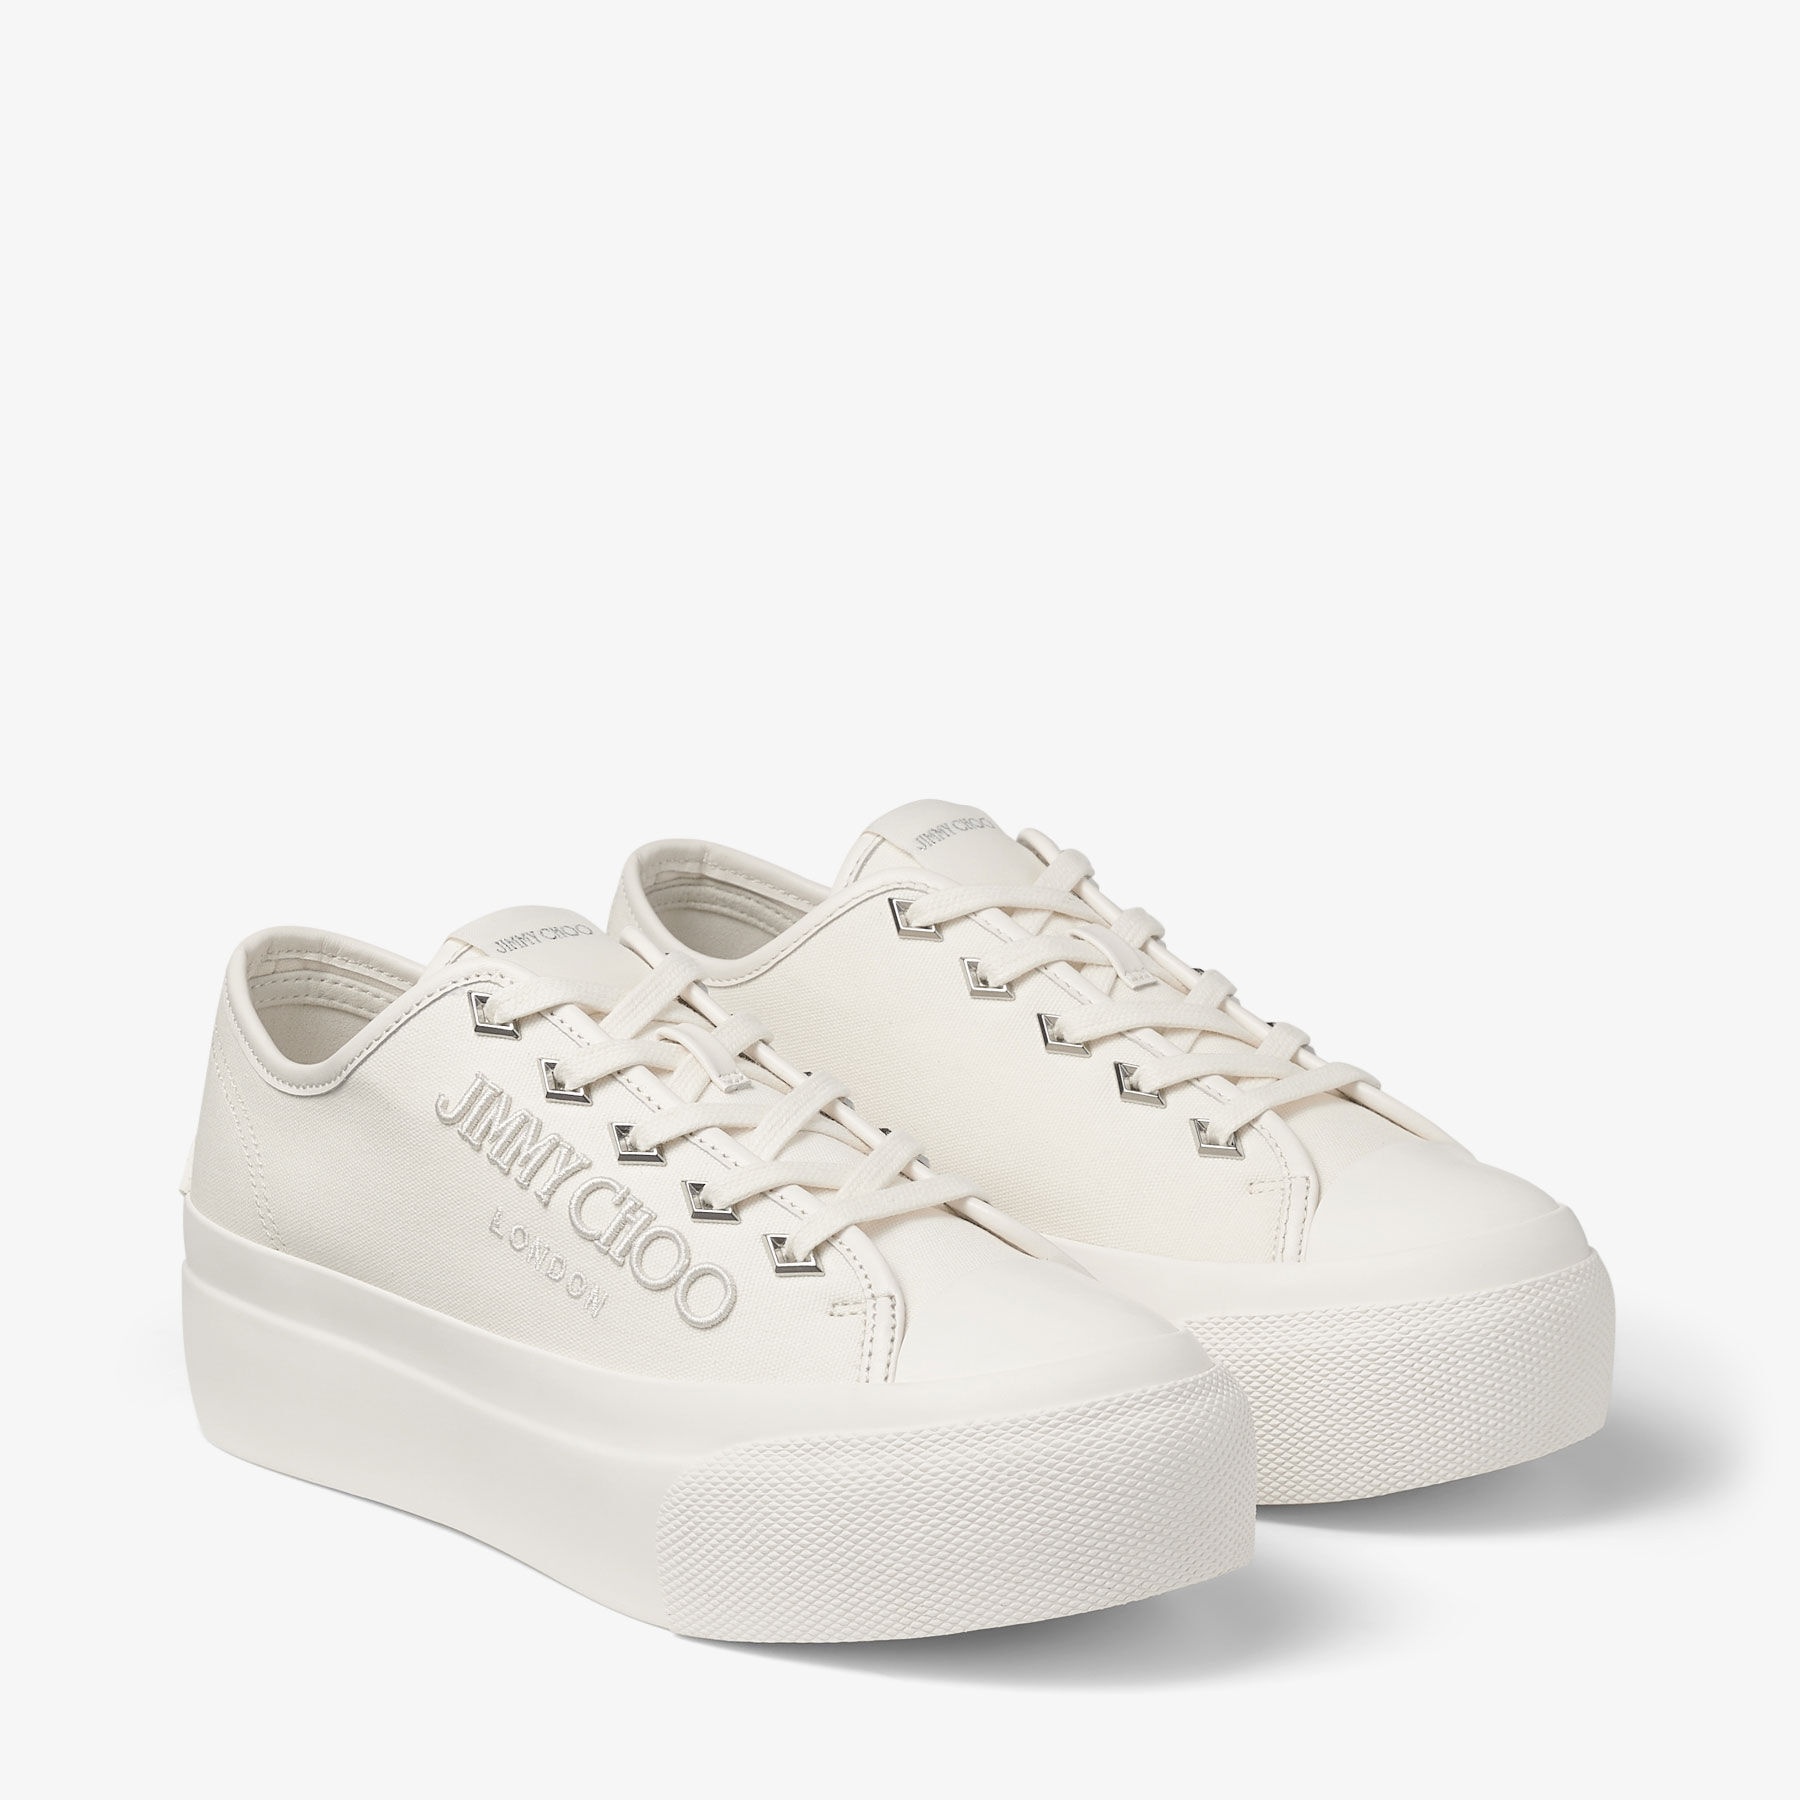 Palma Maxi/F
Latte Canvas Platform Trainers with Embroidered Logo - 2